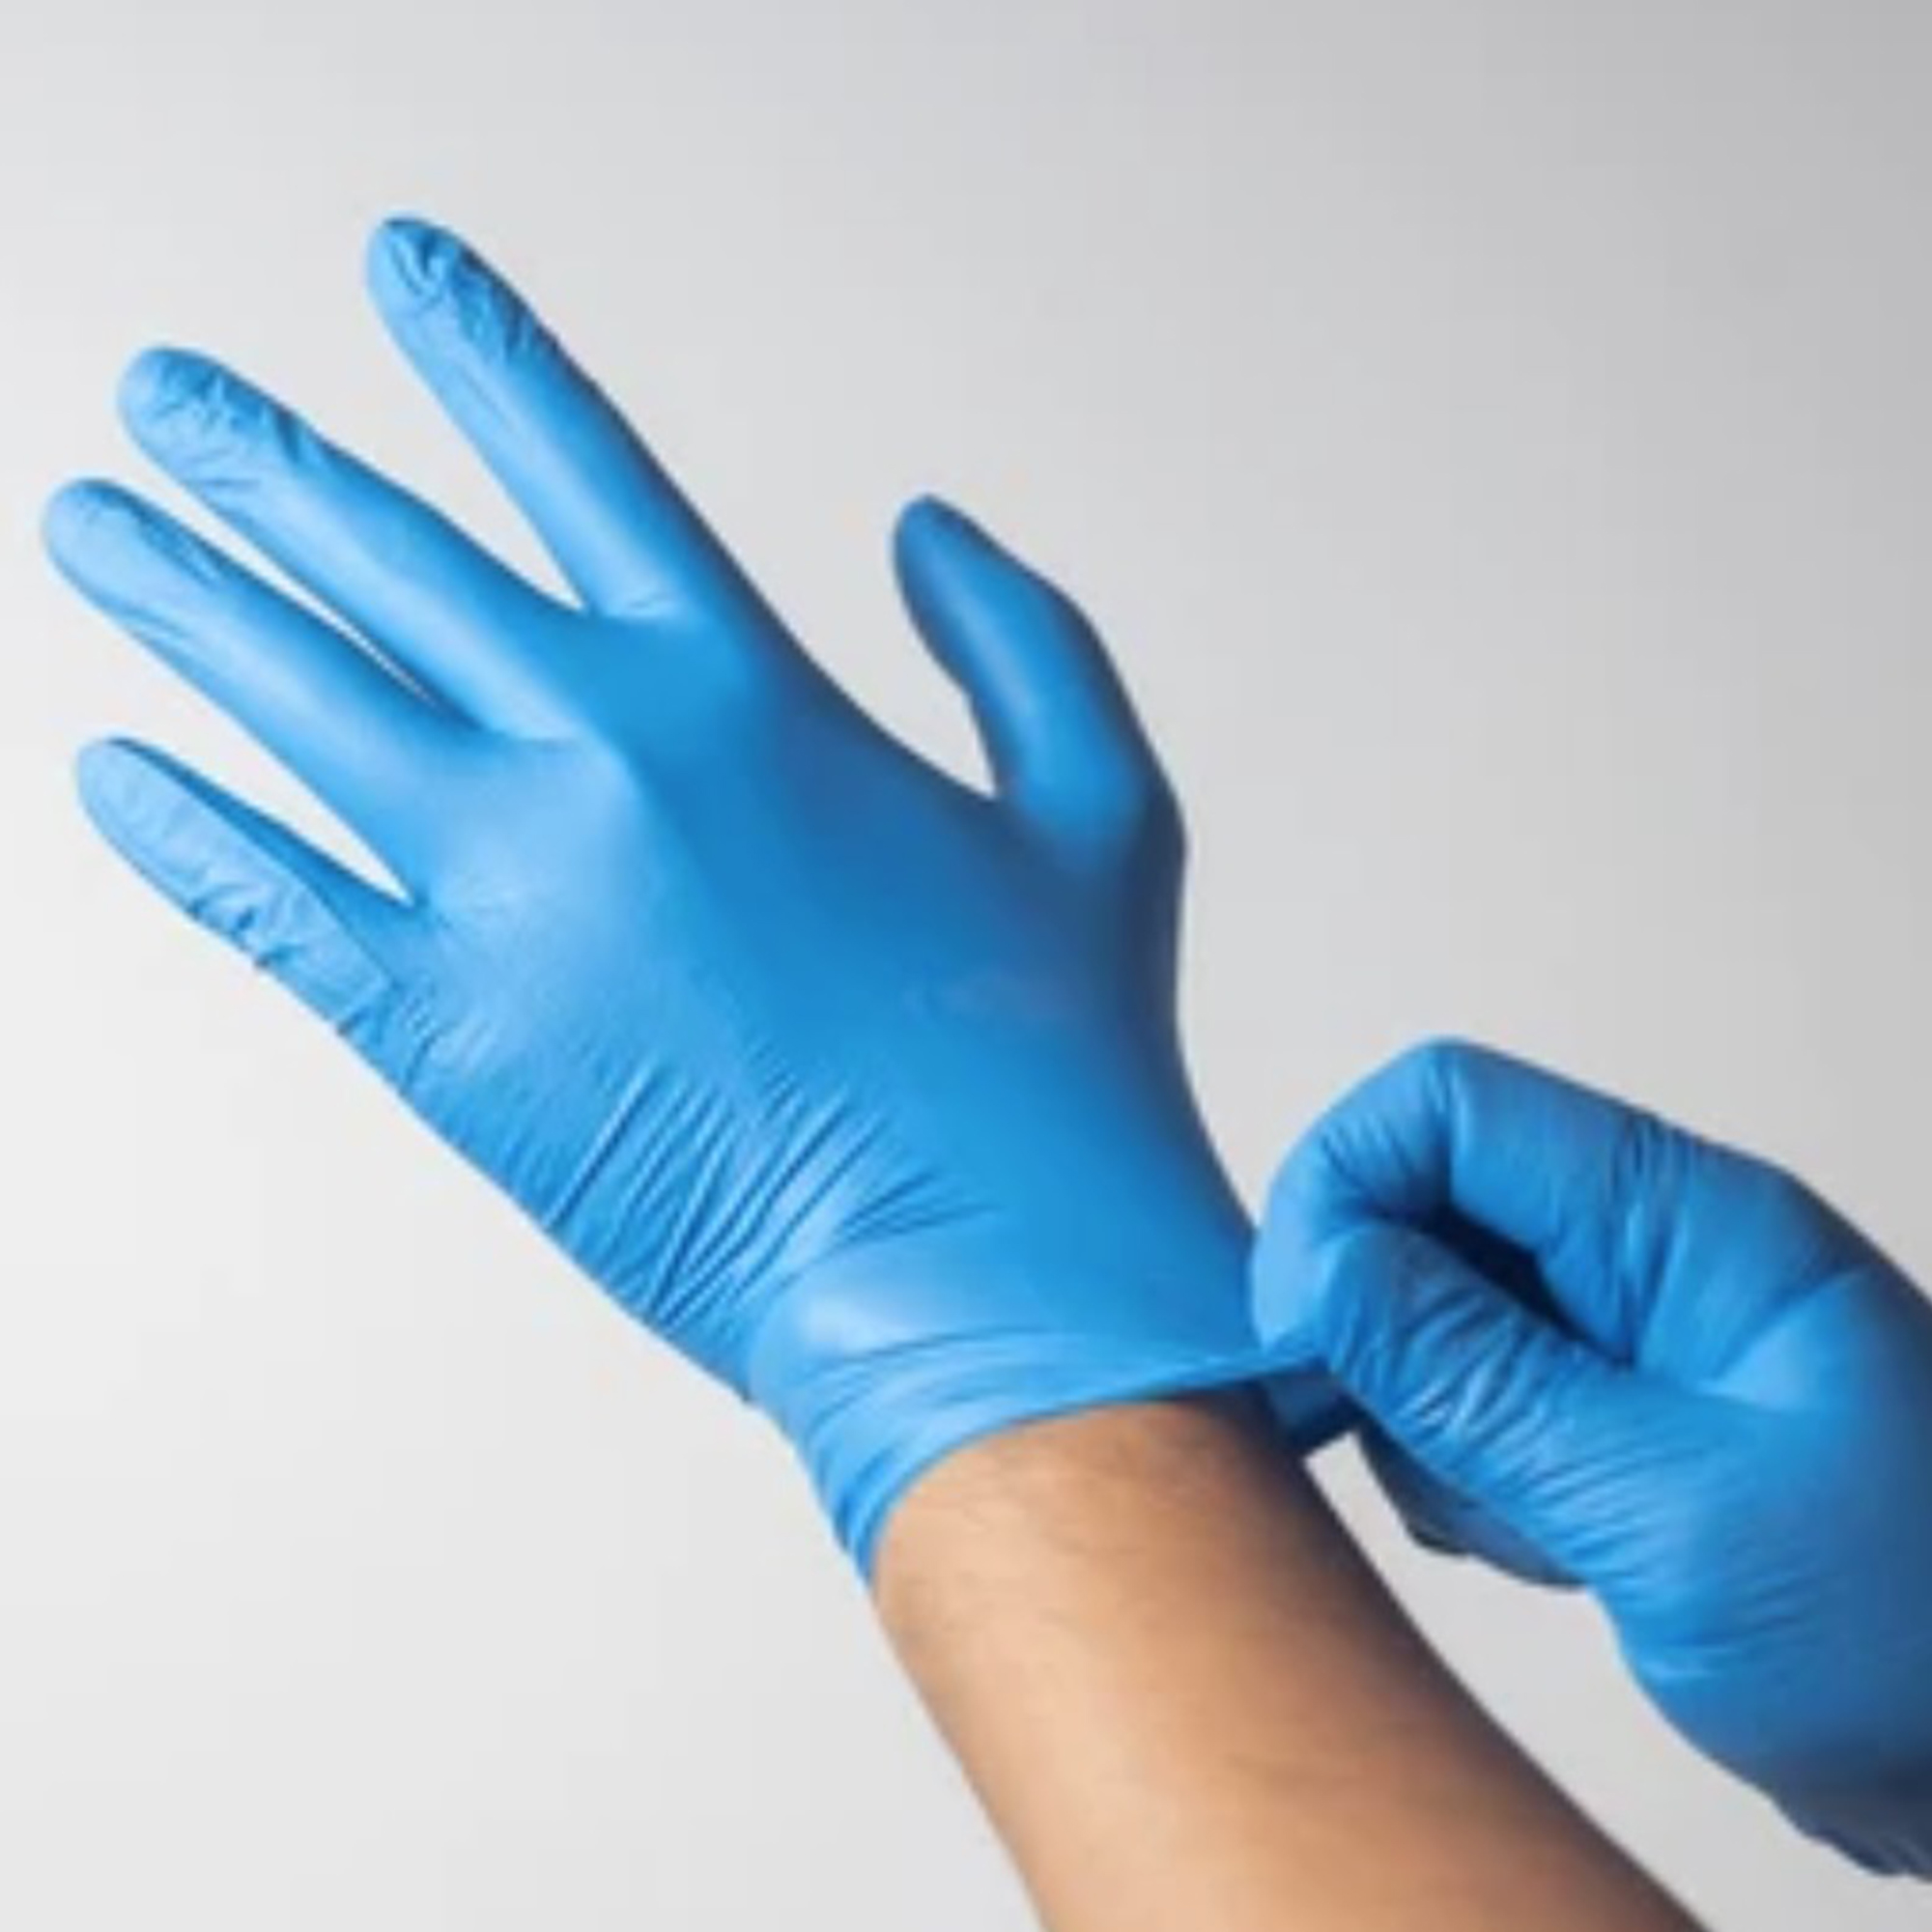 Medical practice/MEDICAL EXAMINATION AND SURGICAL GLOVES/Latex and Nitrile Medical Examination Gloves